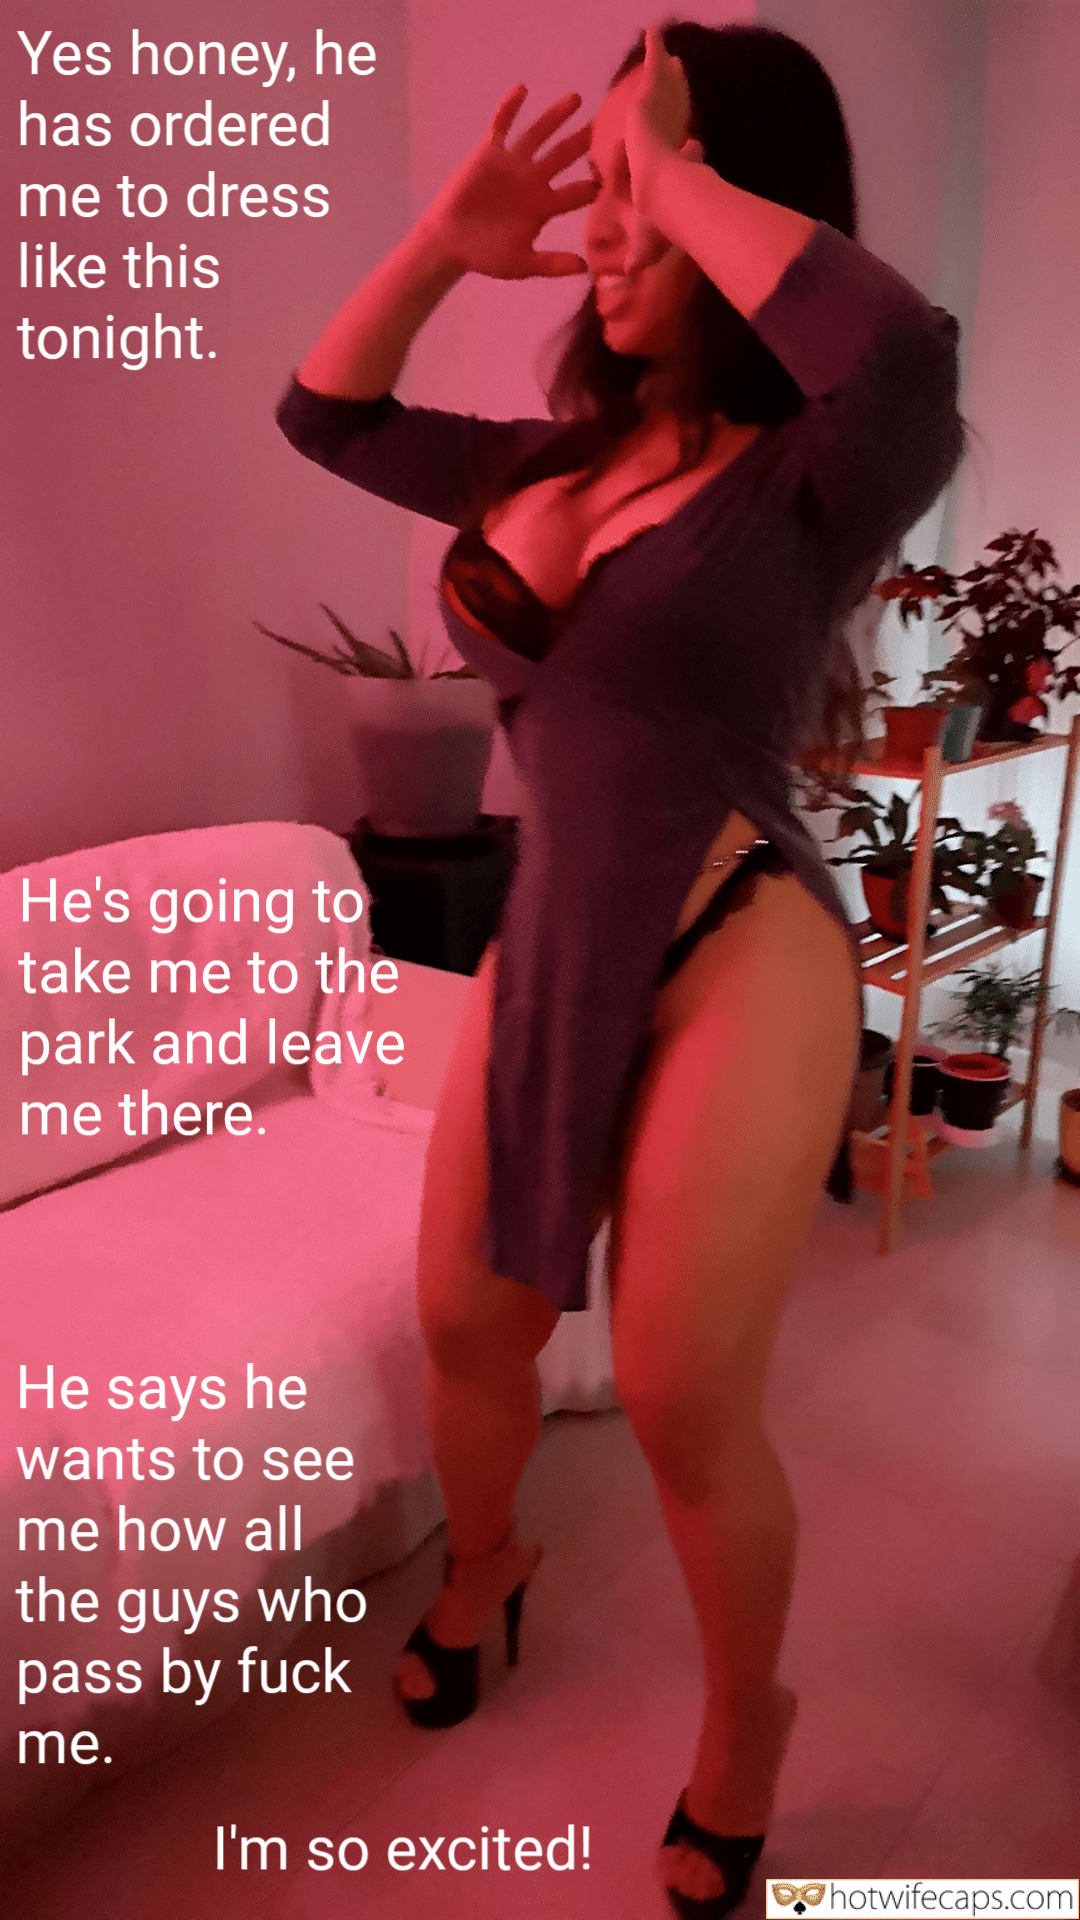 Bull, Challenges and Rules, Cheating, Cum Slut, Dogging, Getting Ready, Group Sex, Humiliation, Public, Wife Sharing Hotwife Caption №568674 Latina slutwife Tina Biwing picture